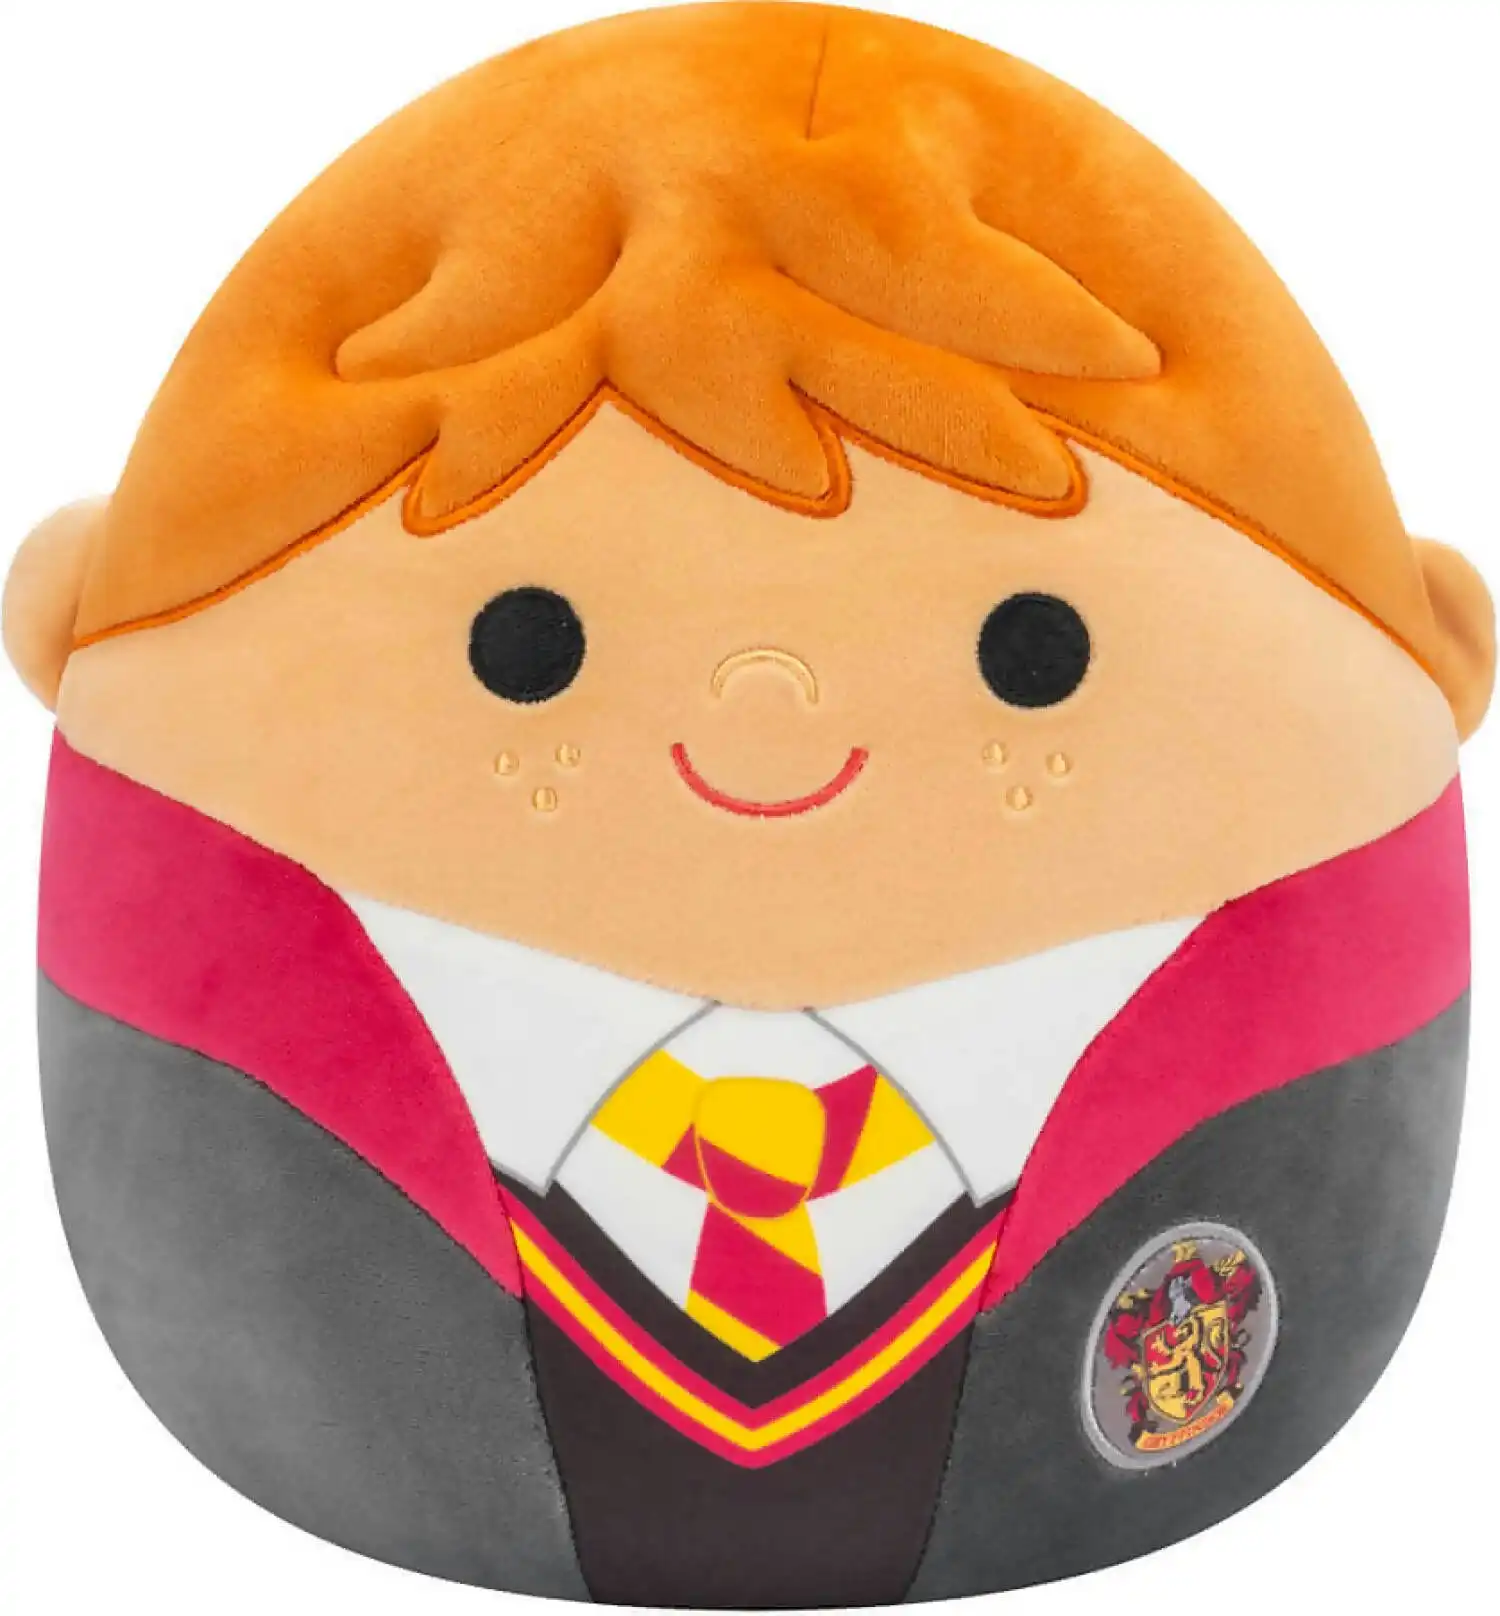 Squishmallows - Ron Weasley 8-inch Plush - Harry Potter